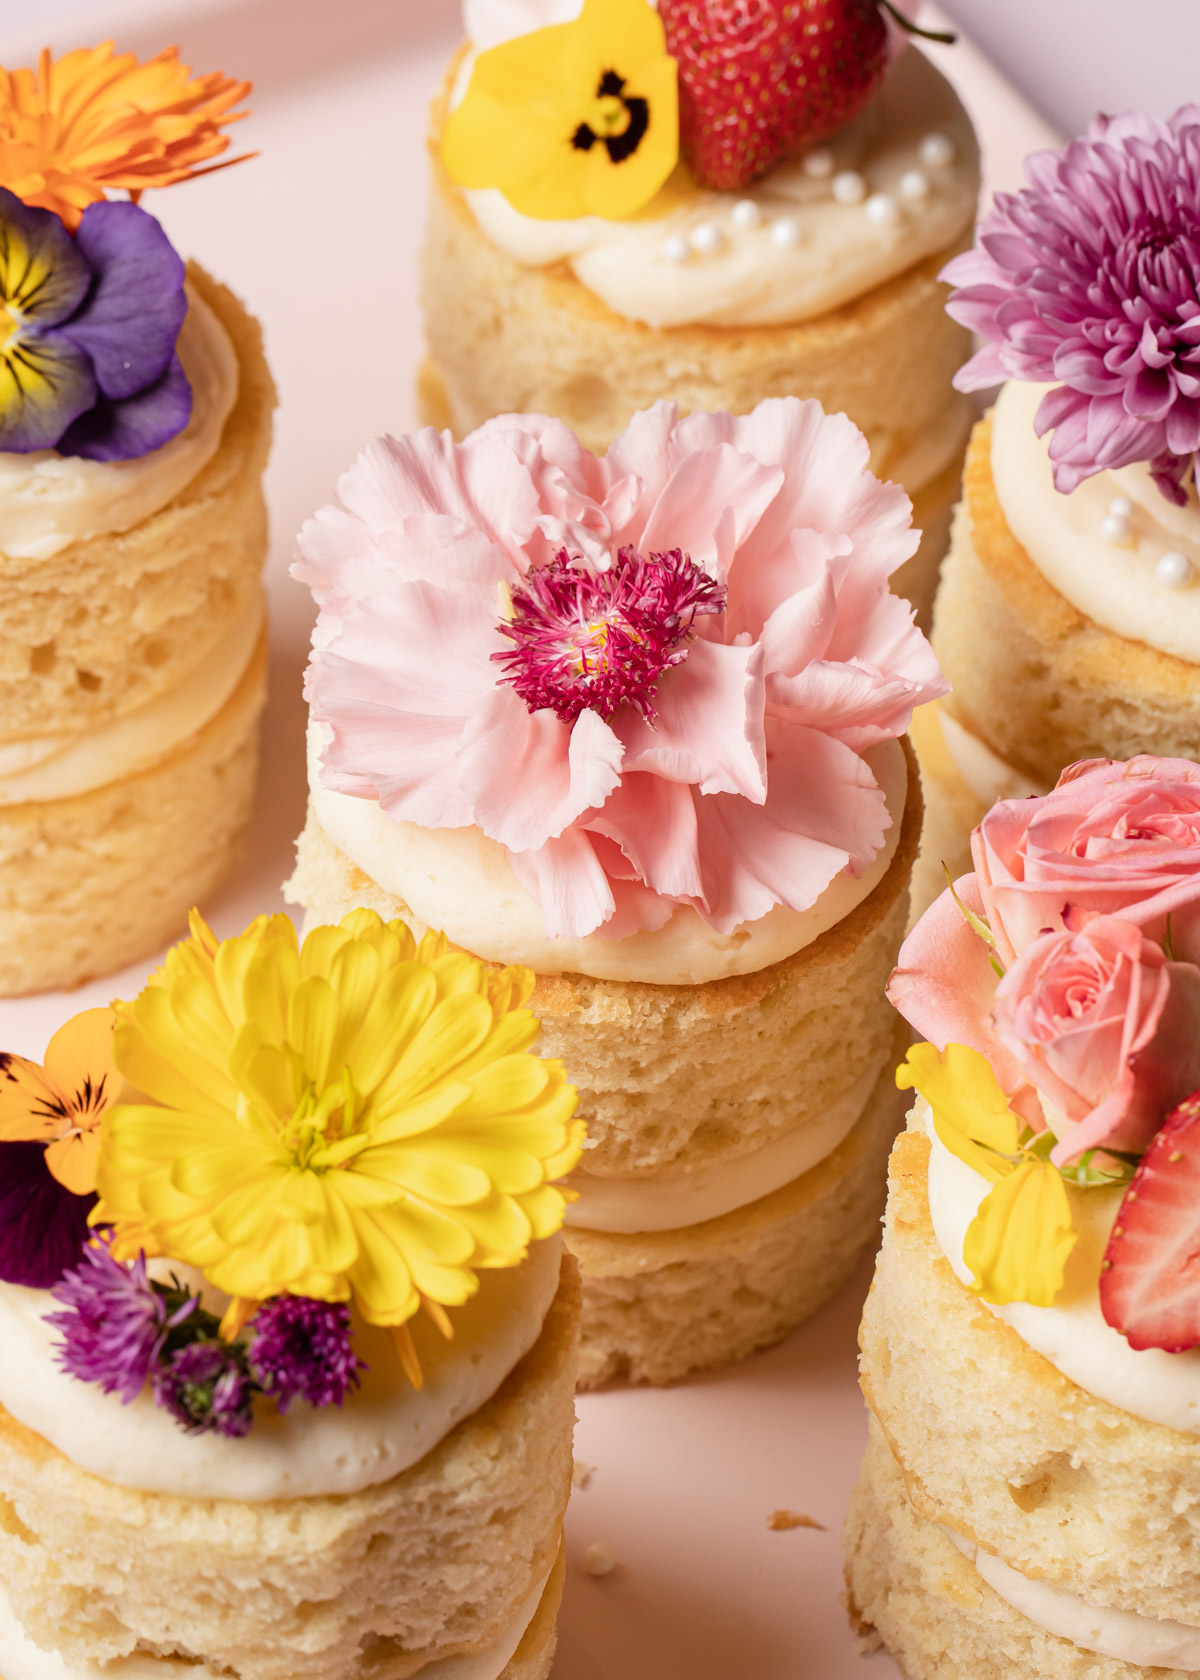 A ¾ close-up view of mini layer cakes with flowers on top